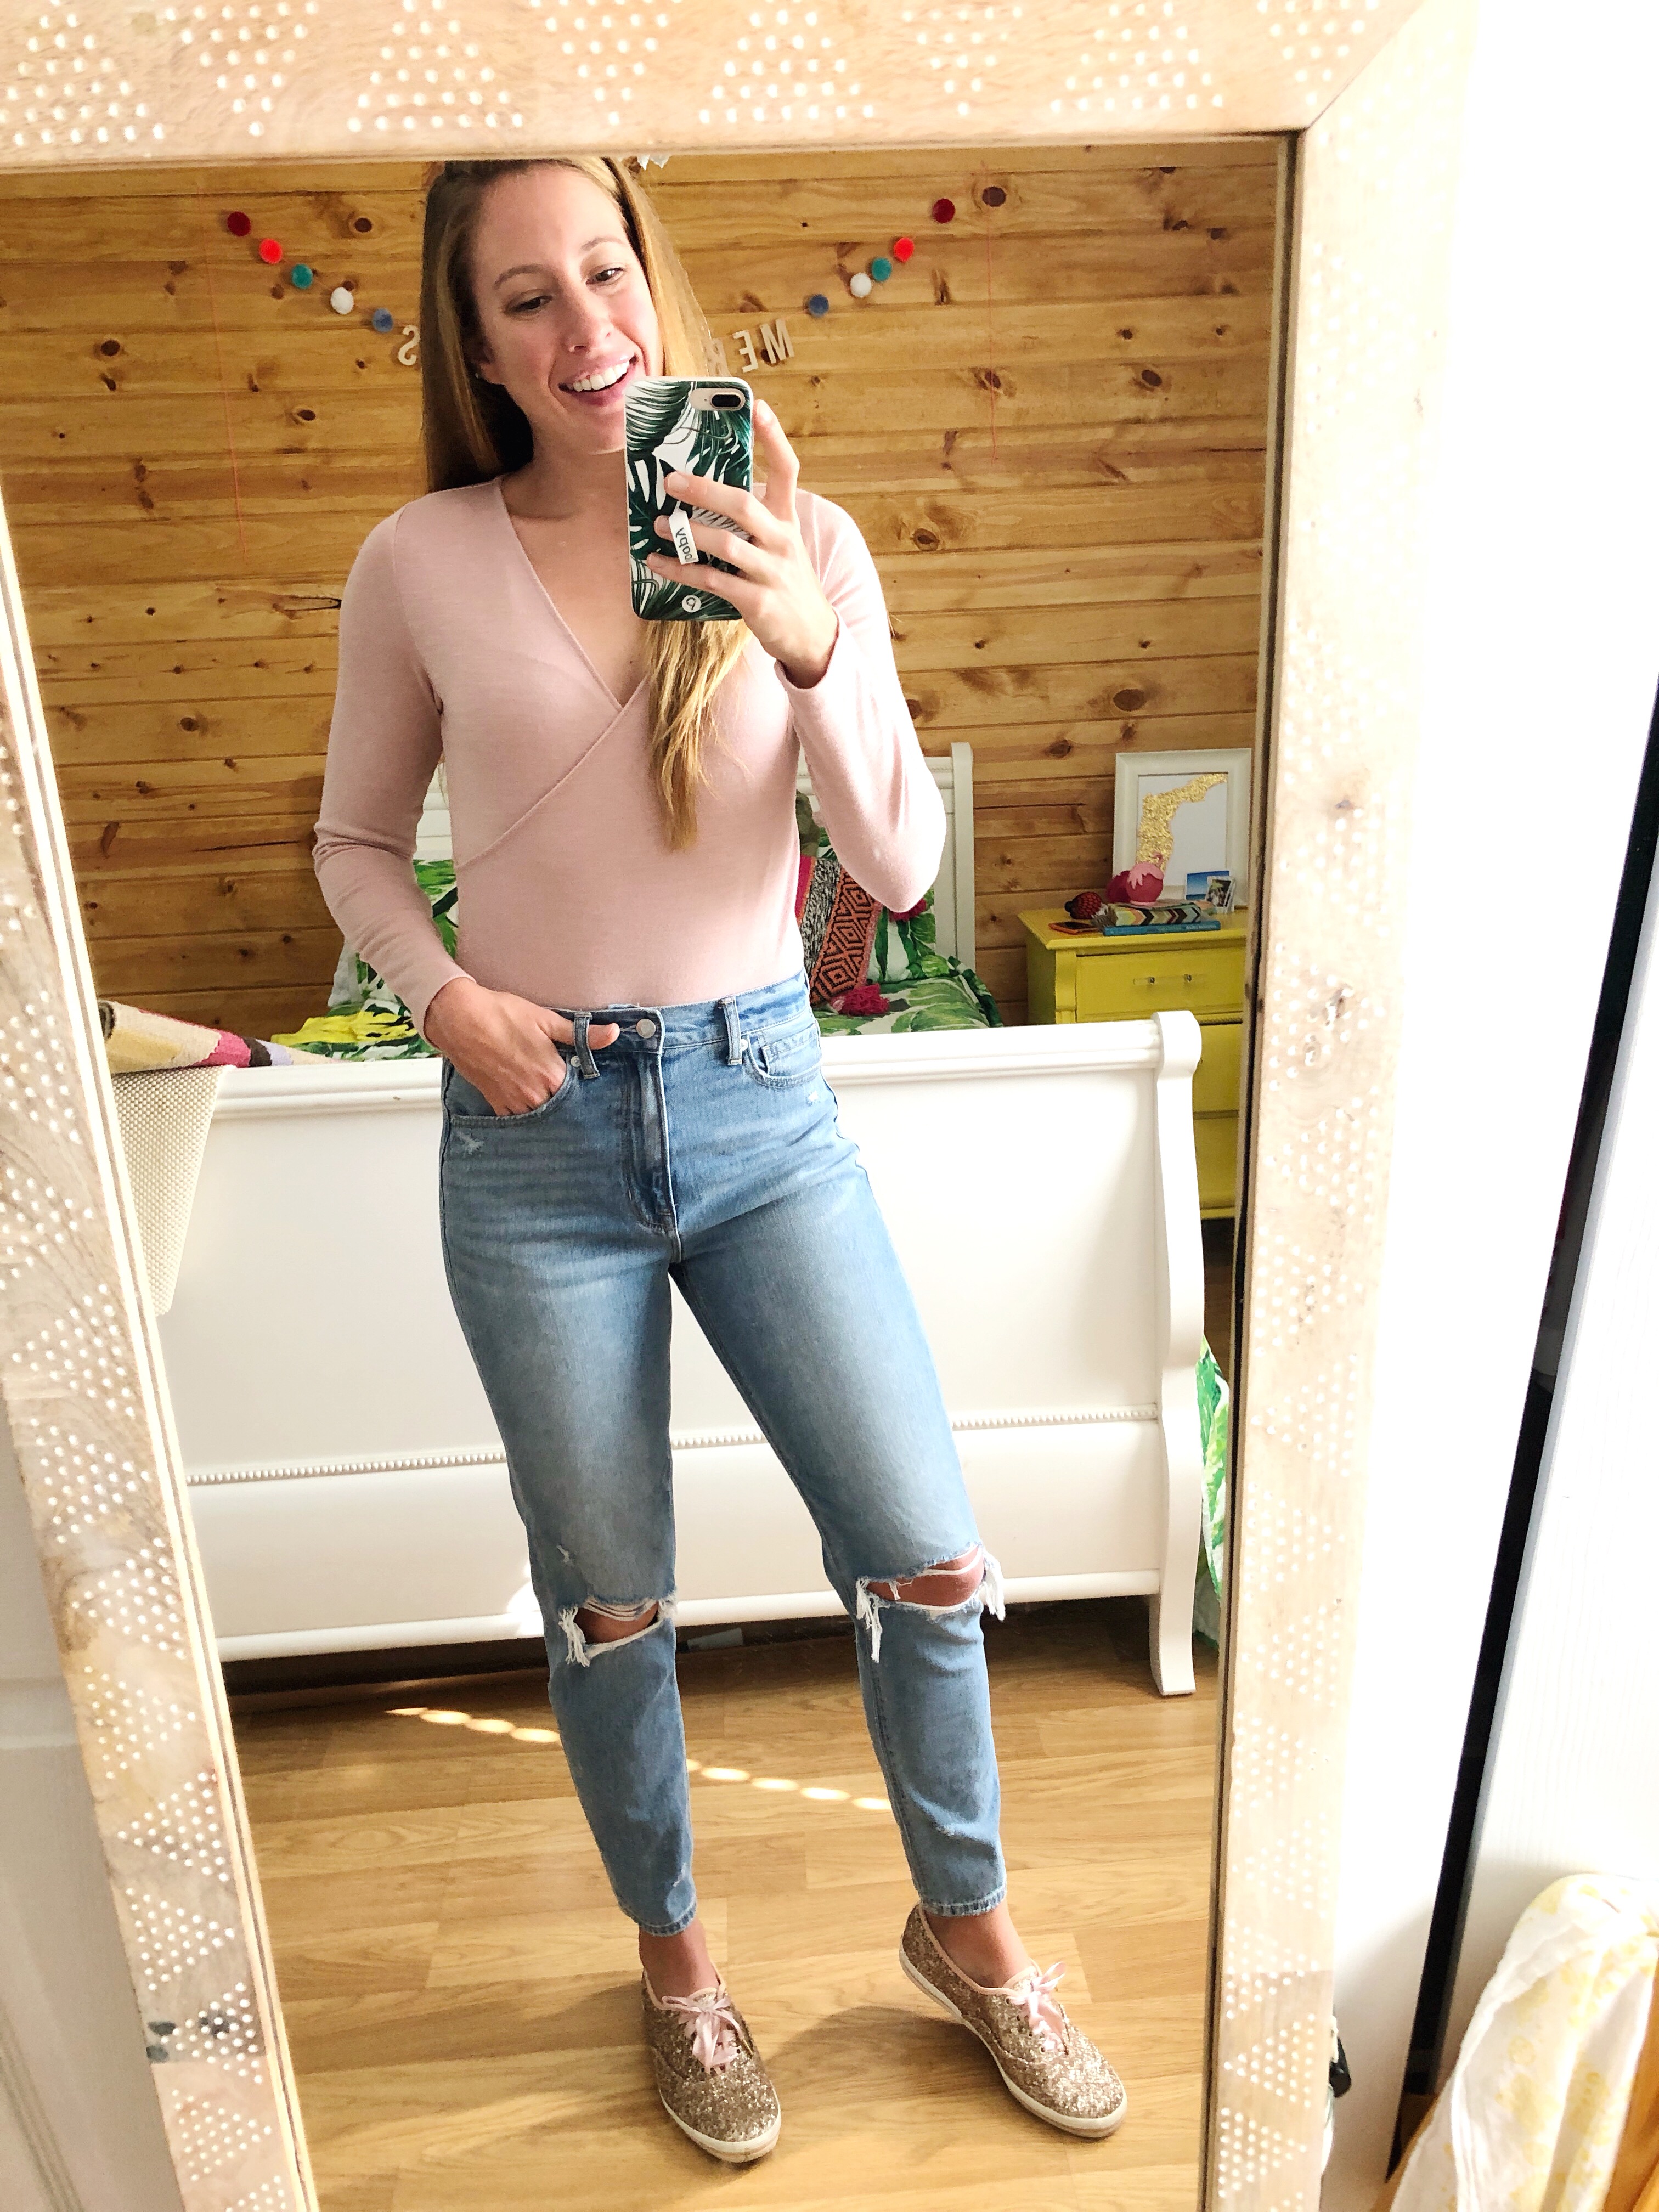 7 Winter Outfit Ideas for Warm Weather / Winter Outfit Inspiration / How to Style Mom Jeans / Keds X Kate Spade Glitter Shoes